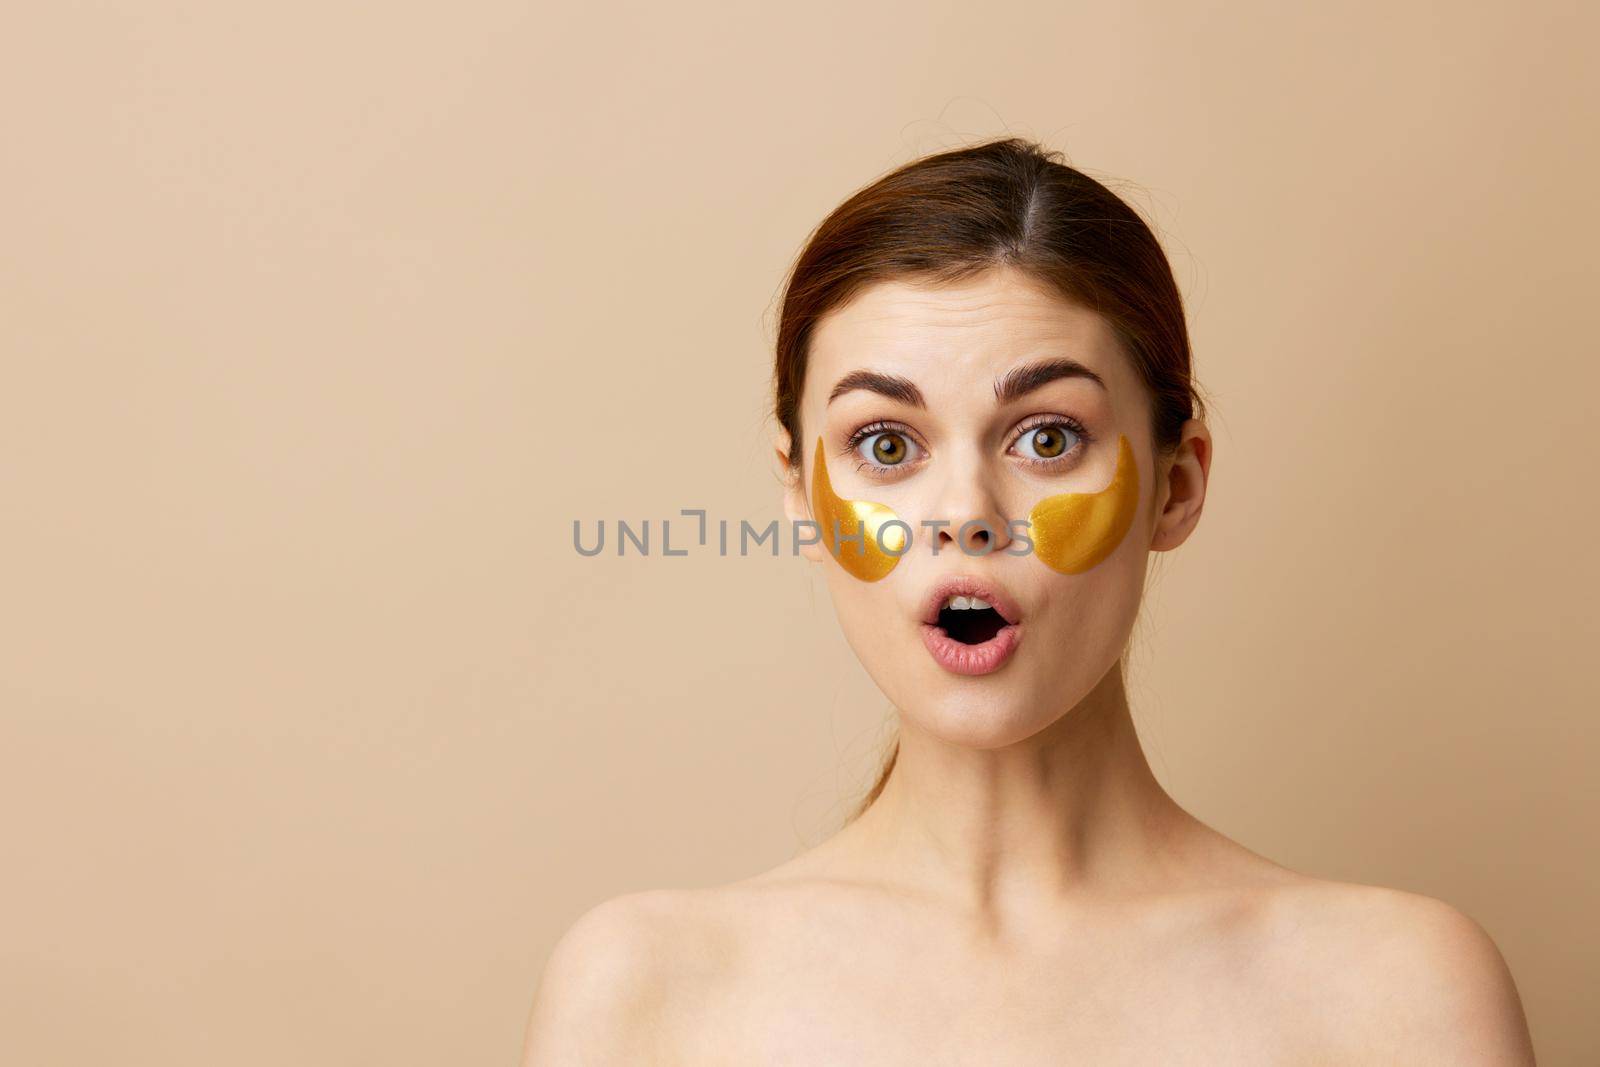 pretty woman skin care face patches bare shoulders hygiene close-up Lifestyle. High quality photo